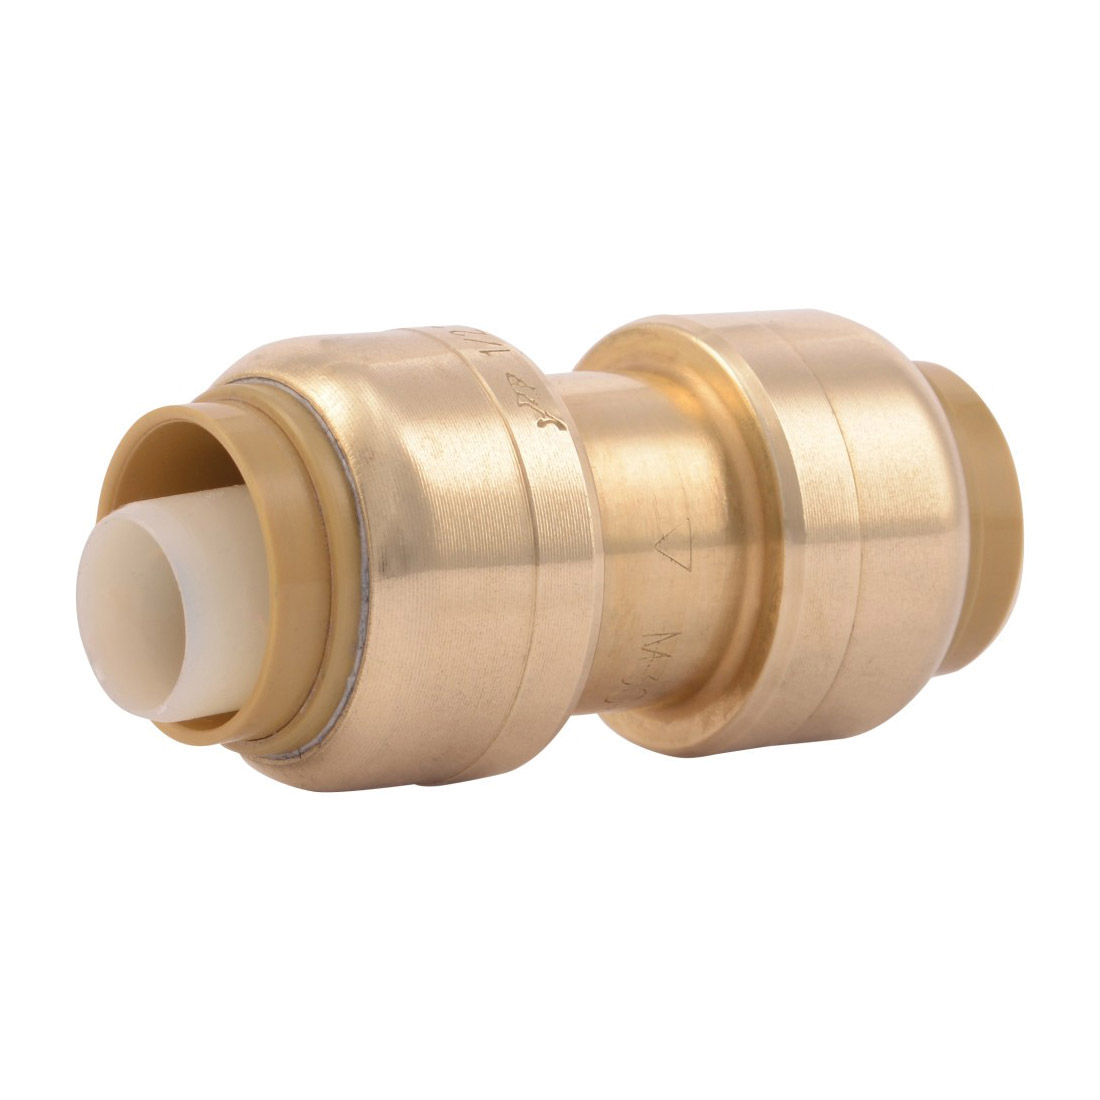 Sharkbite® U008LF Straight Pipe Coupling, 1/2 in Nominal, Push-Fit End Style, Brass, Import